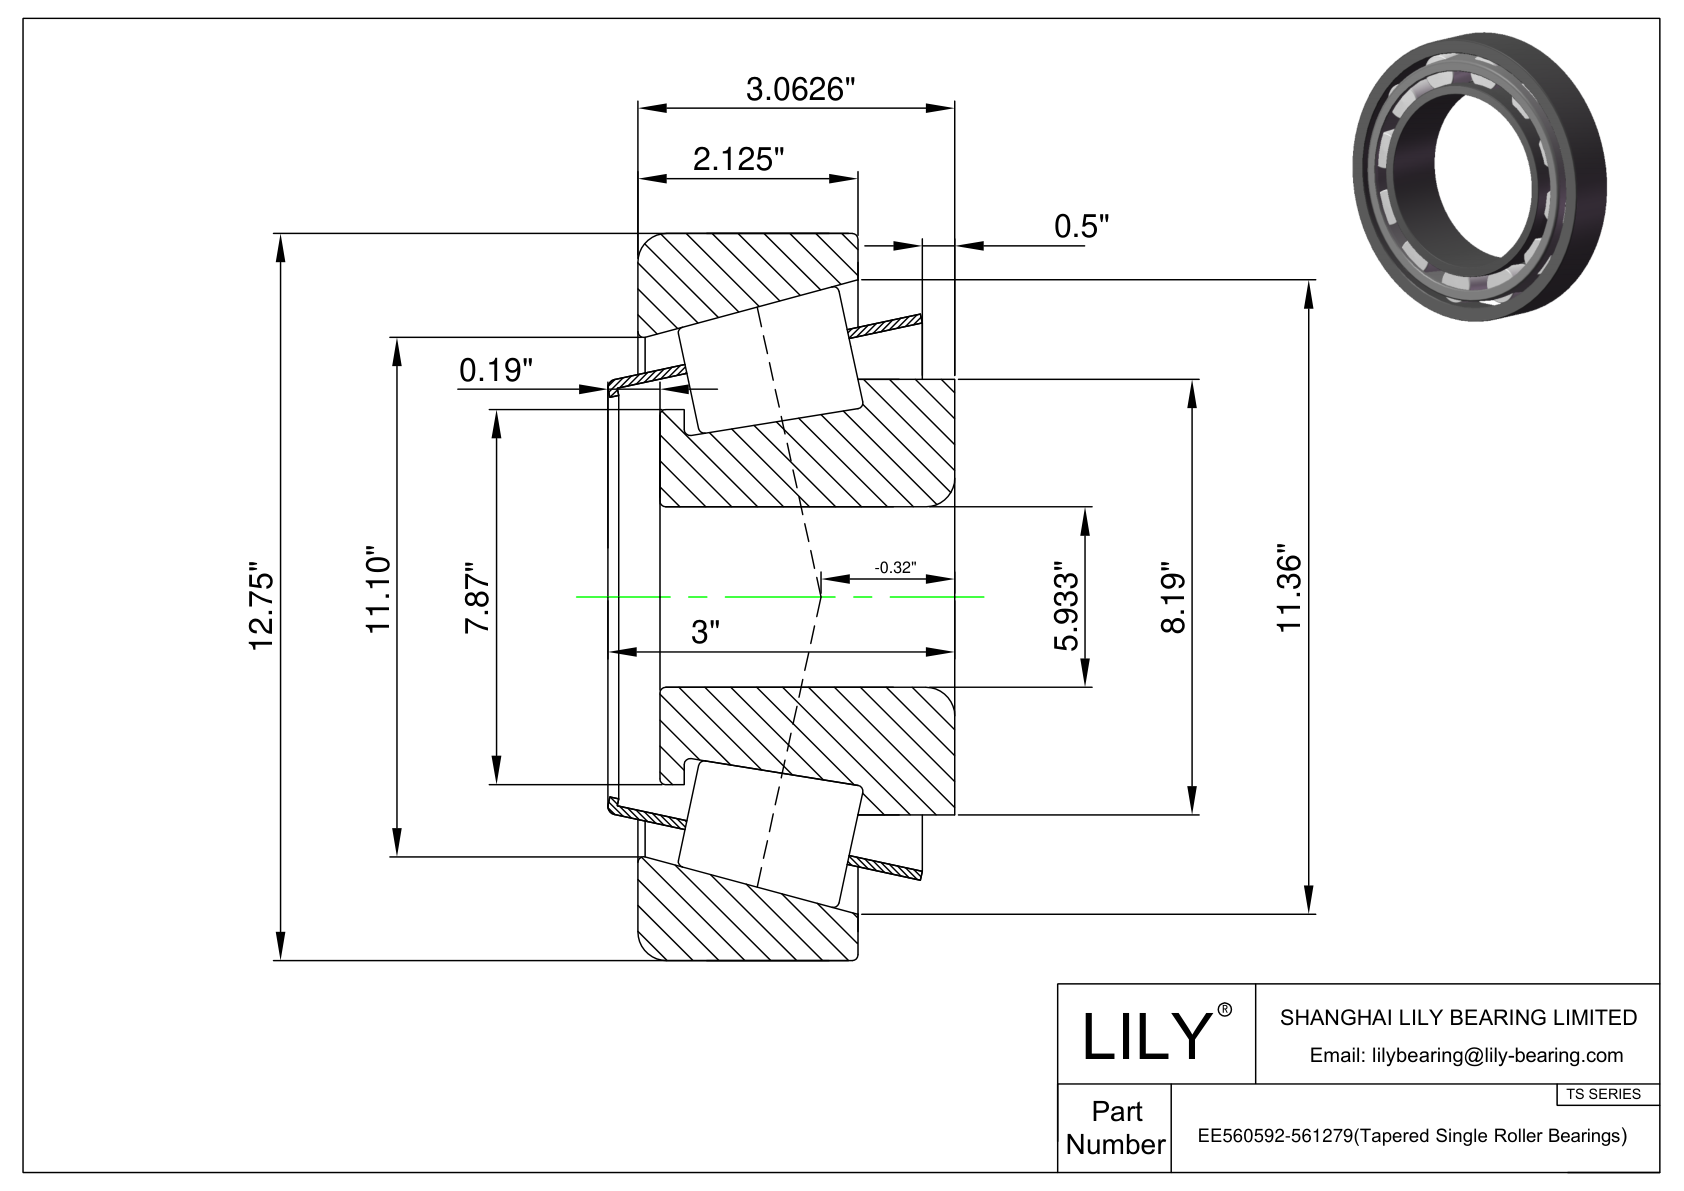 EE560592-561279 TS (Tapered Single Roller Bearings) (Imperial) cad drawing